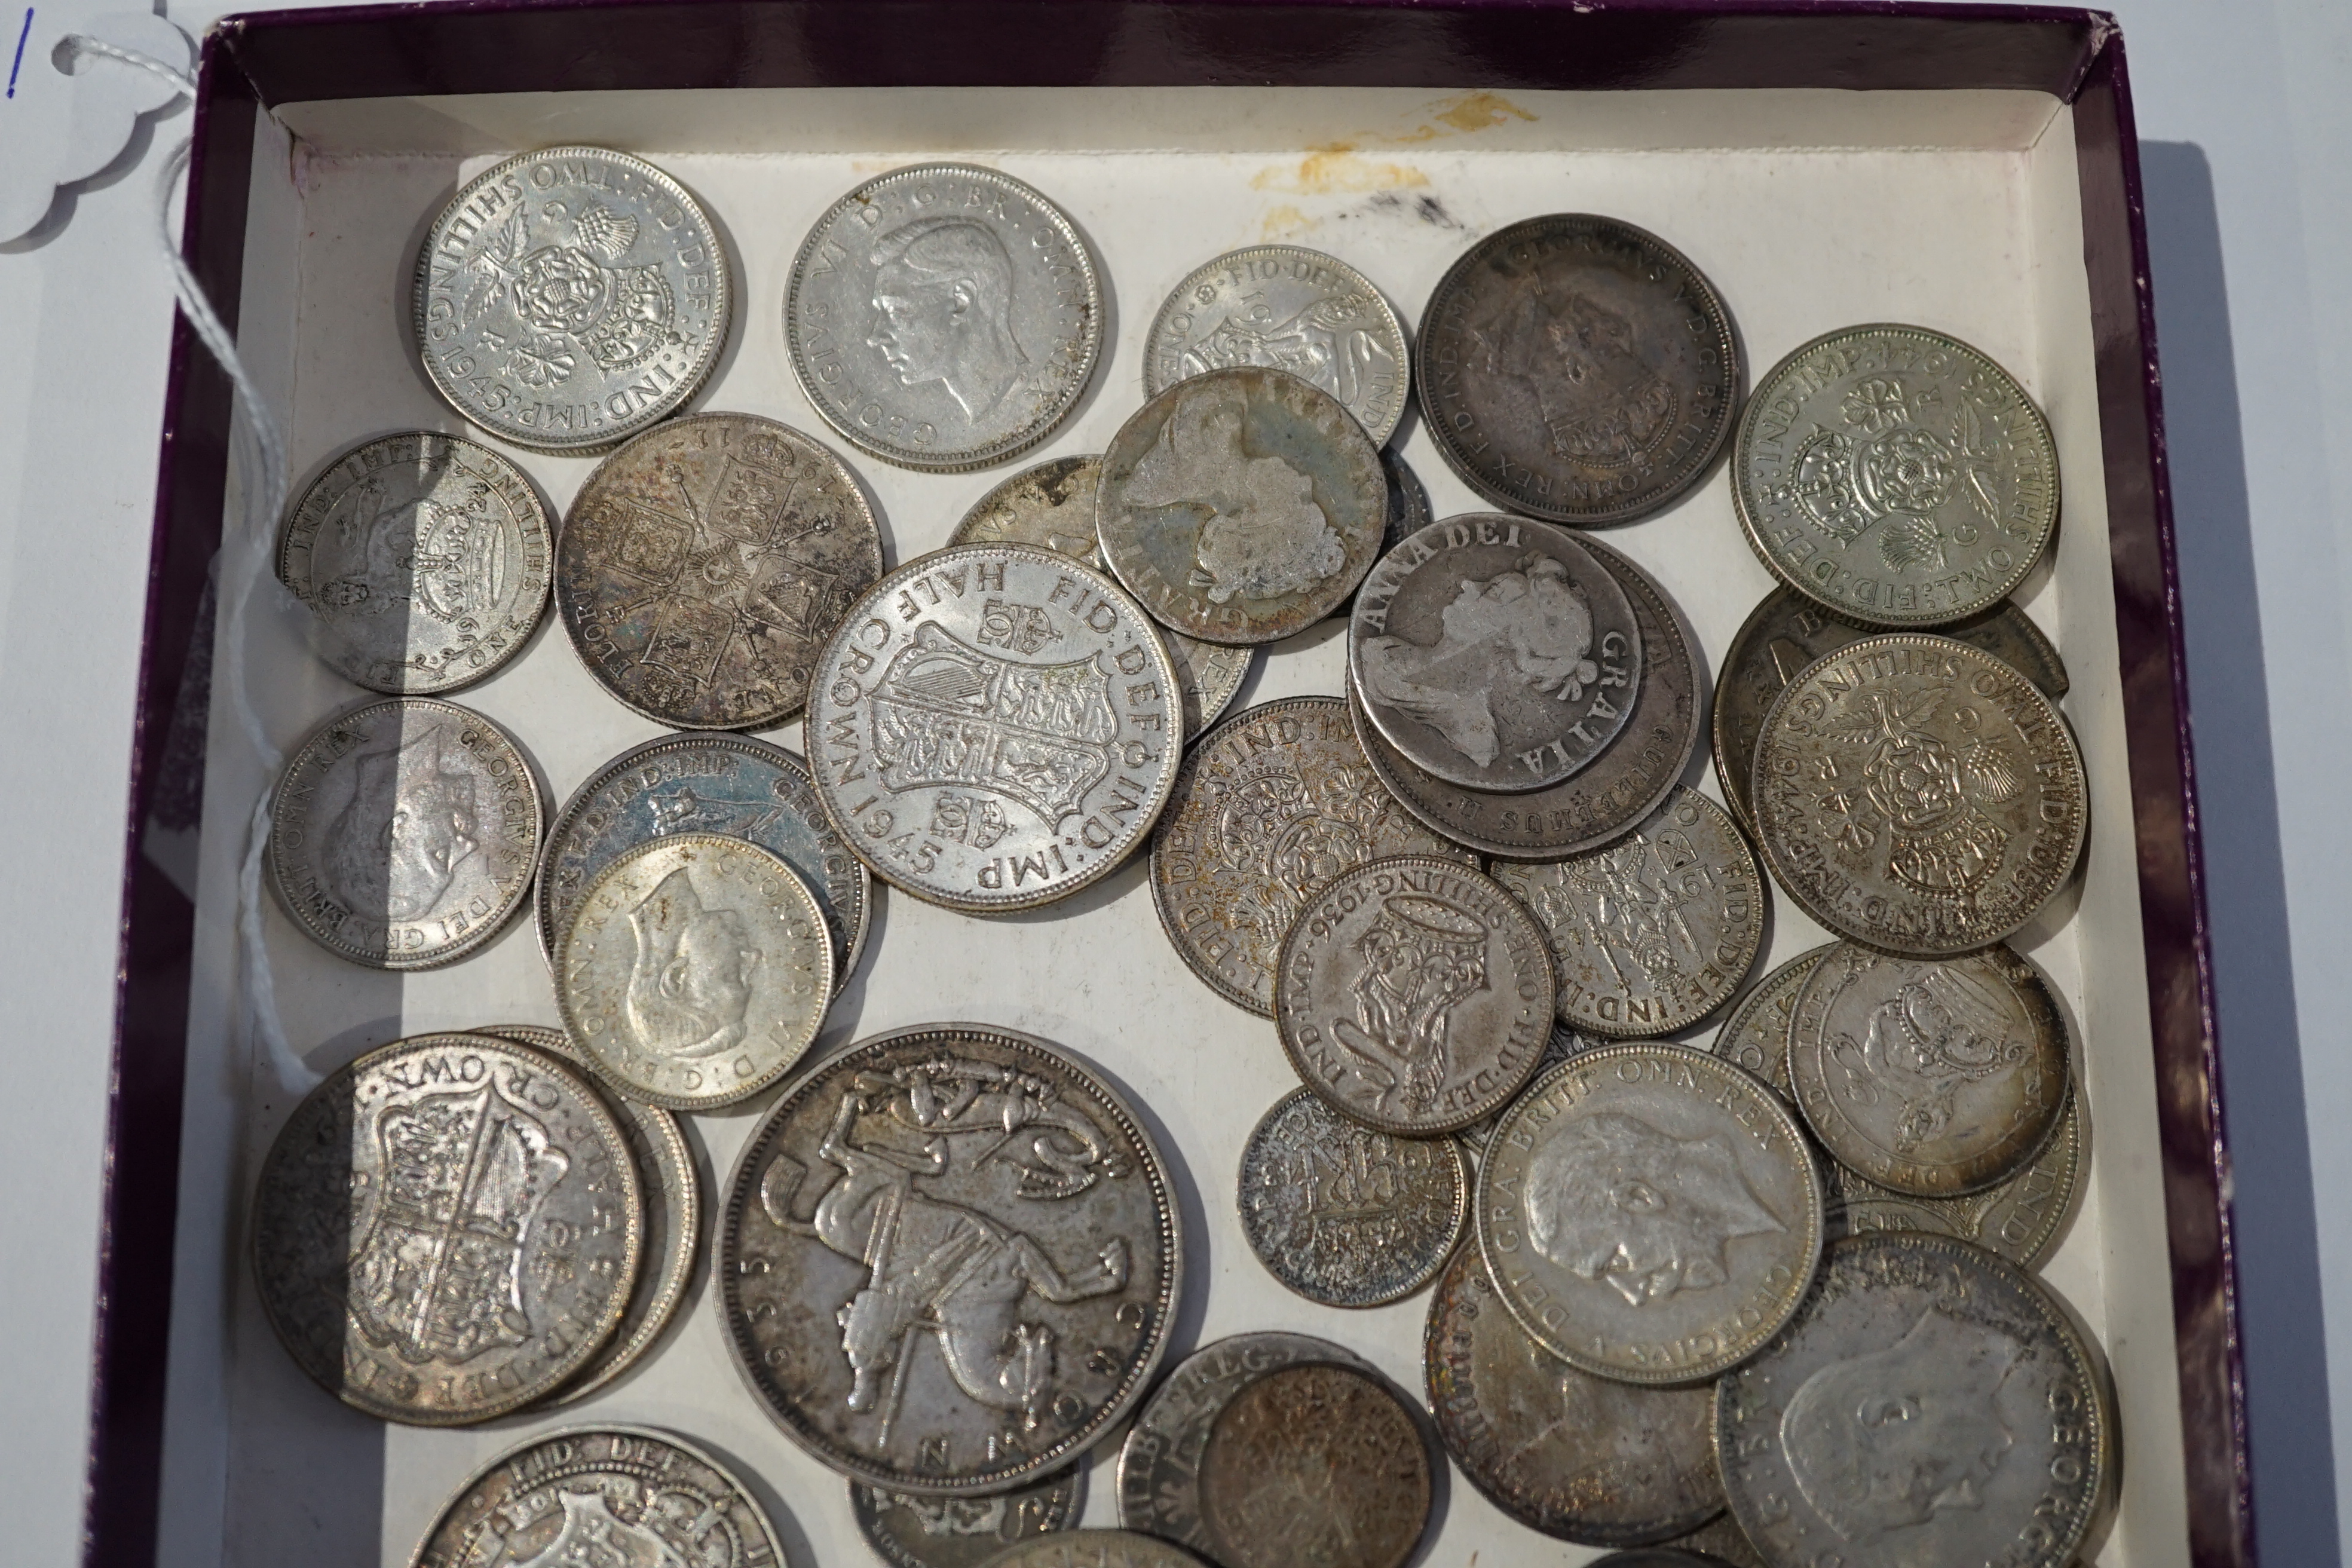 British silver coins, Anne to George VI, highlights include 1935 crown, two Anne shillings, various halfcrowns, florins and shillings and threepence coins, many VF or better, together with a George III 1775 Halfpenny, Ge